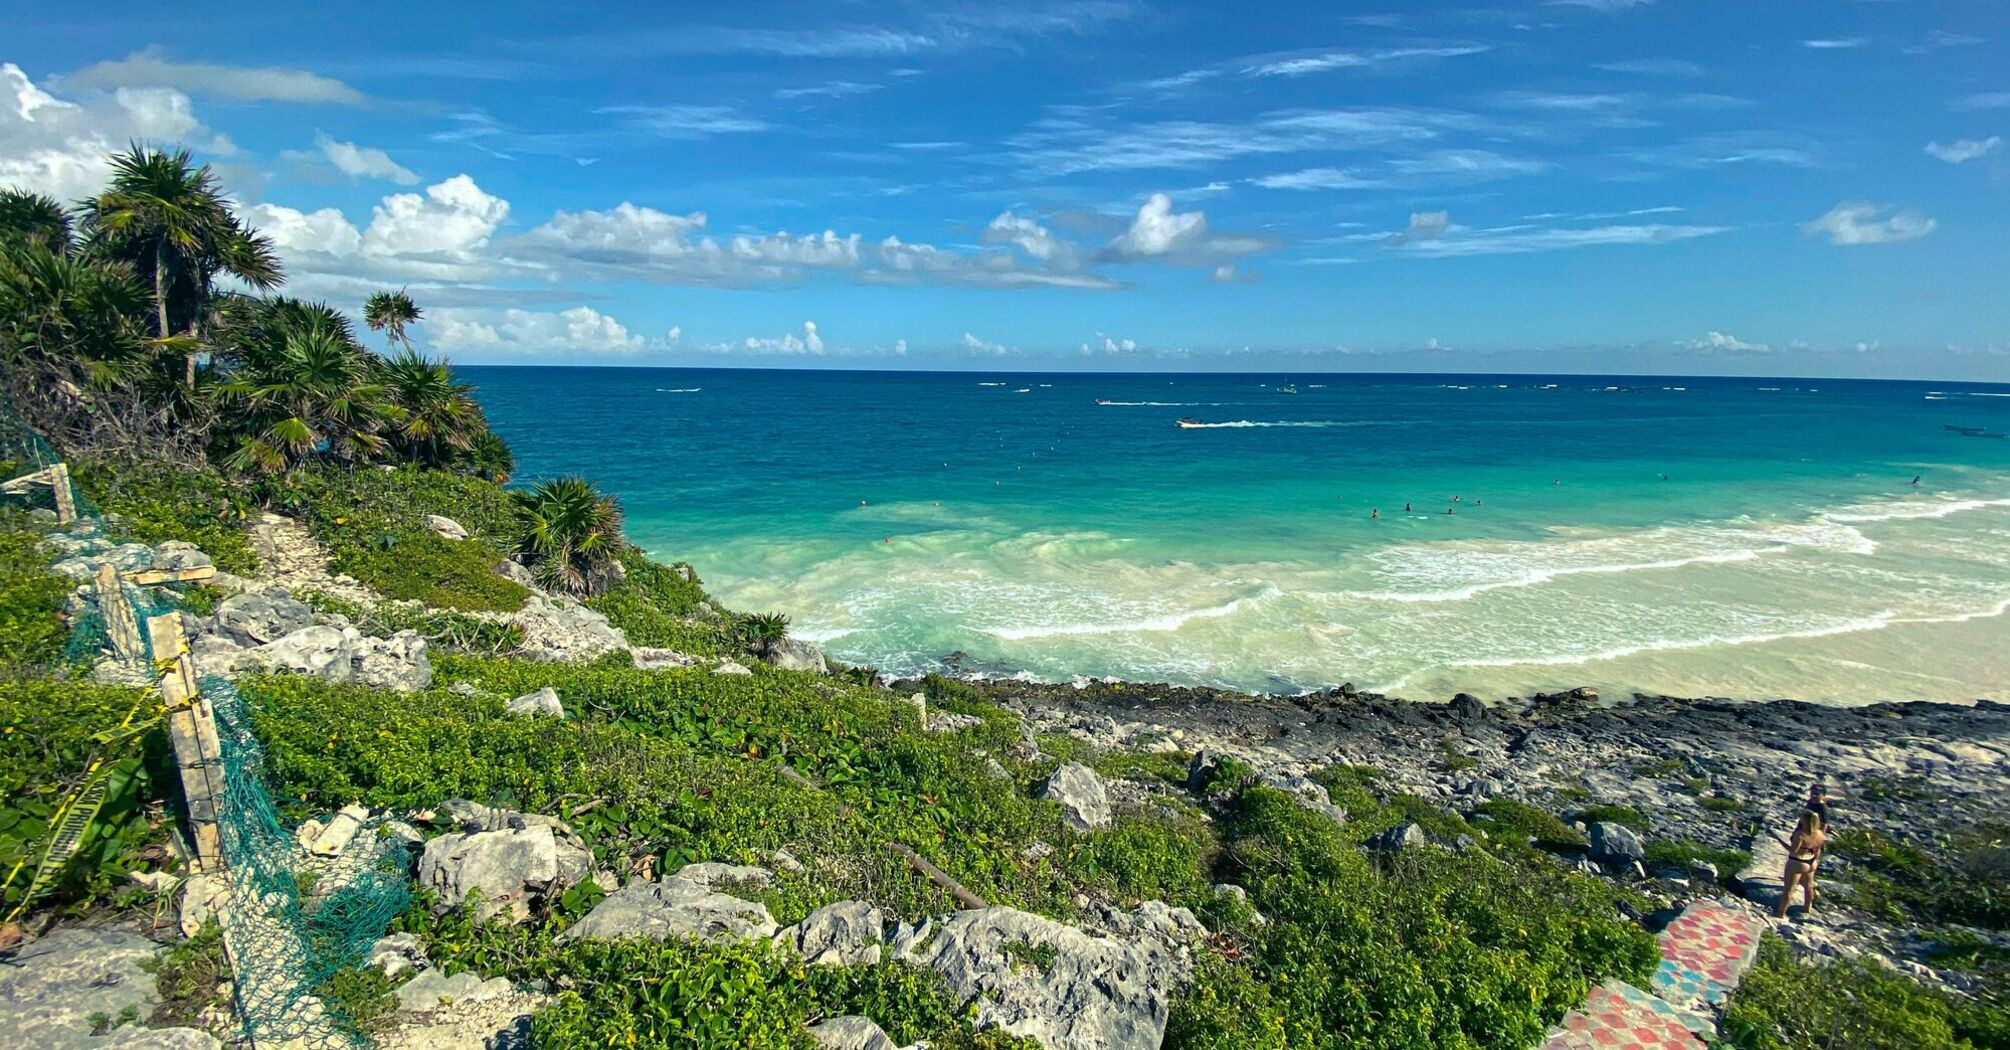 Vibrant view of the turquoise Caribbean Sea from a rocky coastline with lush greenery and a clear blue sky in Quintana Roo